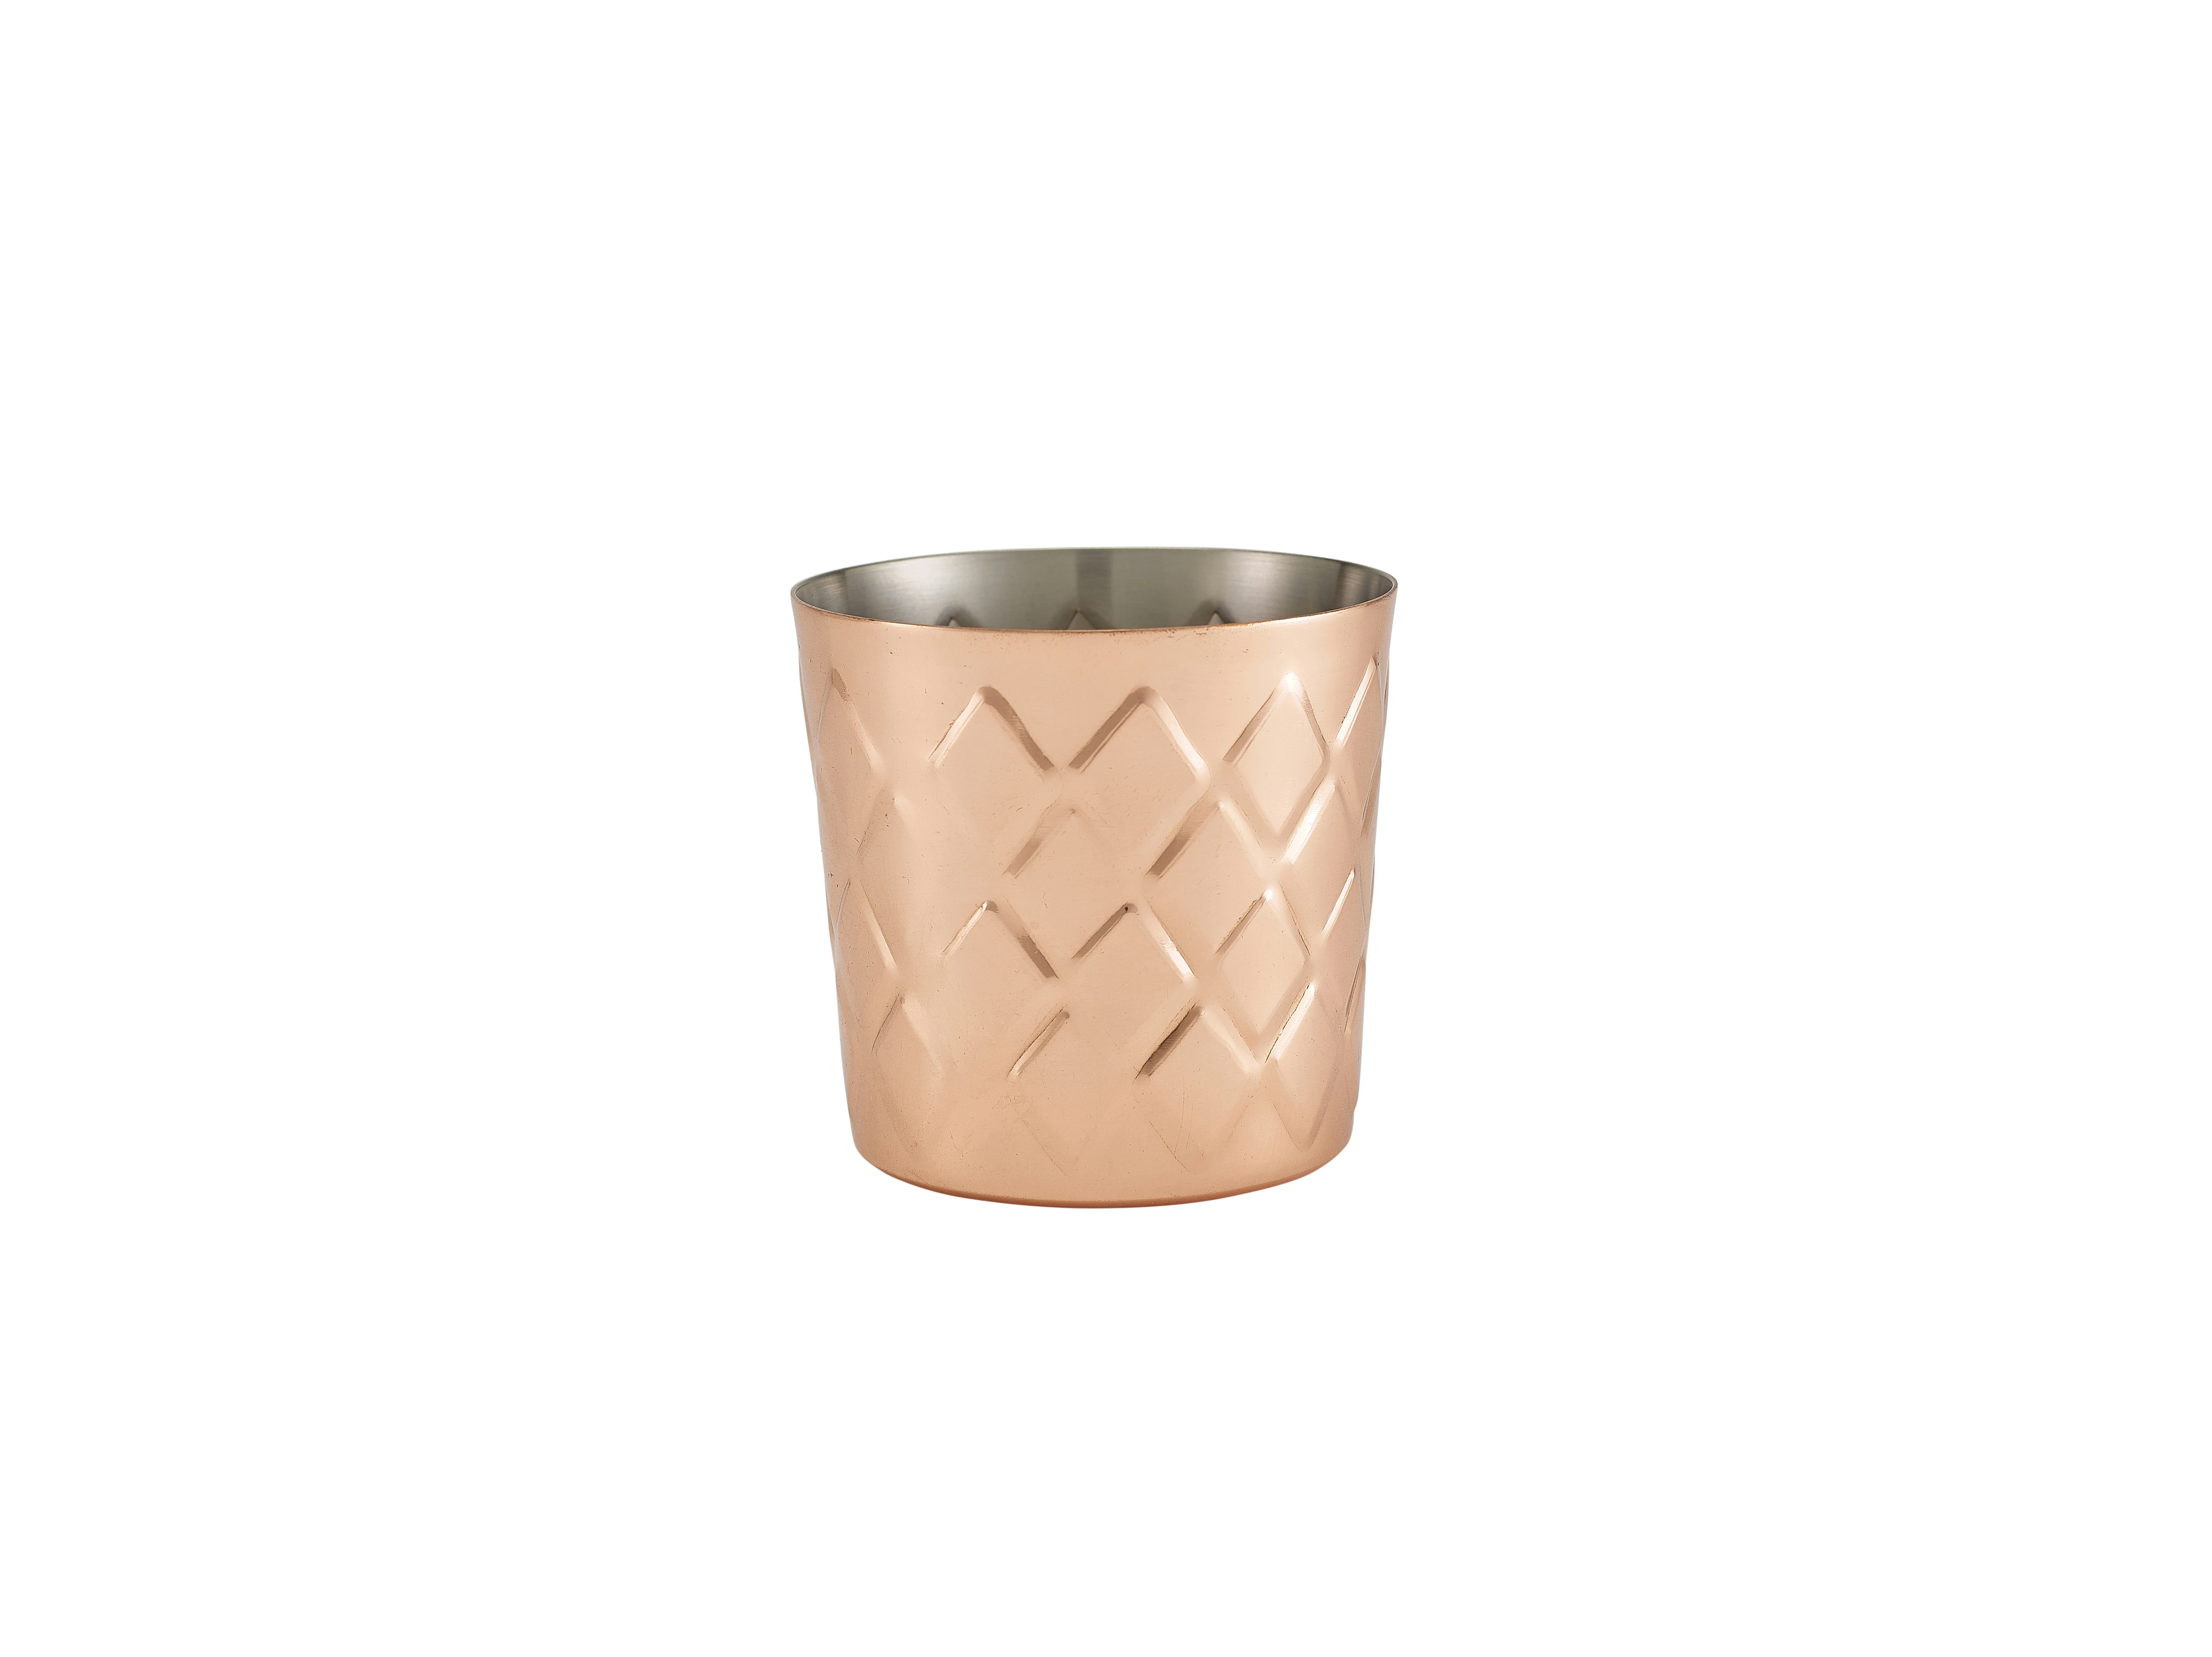 Diamond Pattern Copper Plated Serving Cup 8.5 x 8.5cm